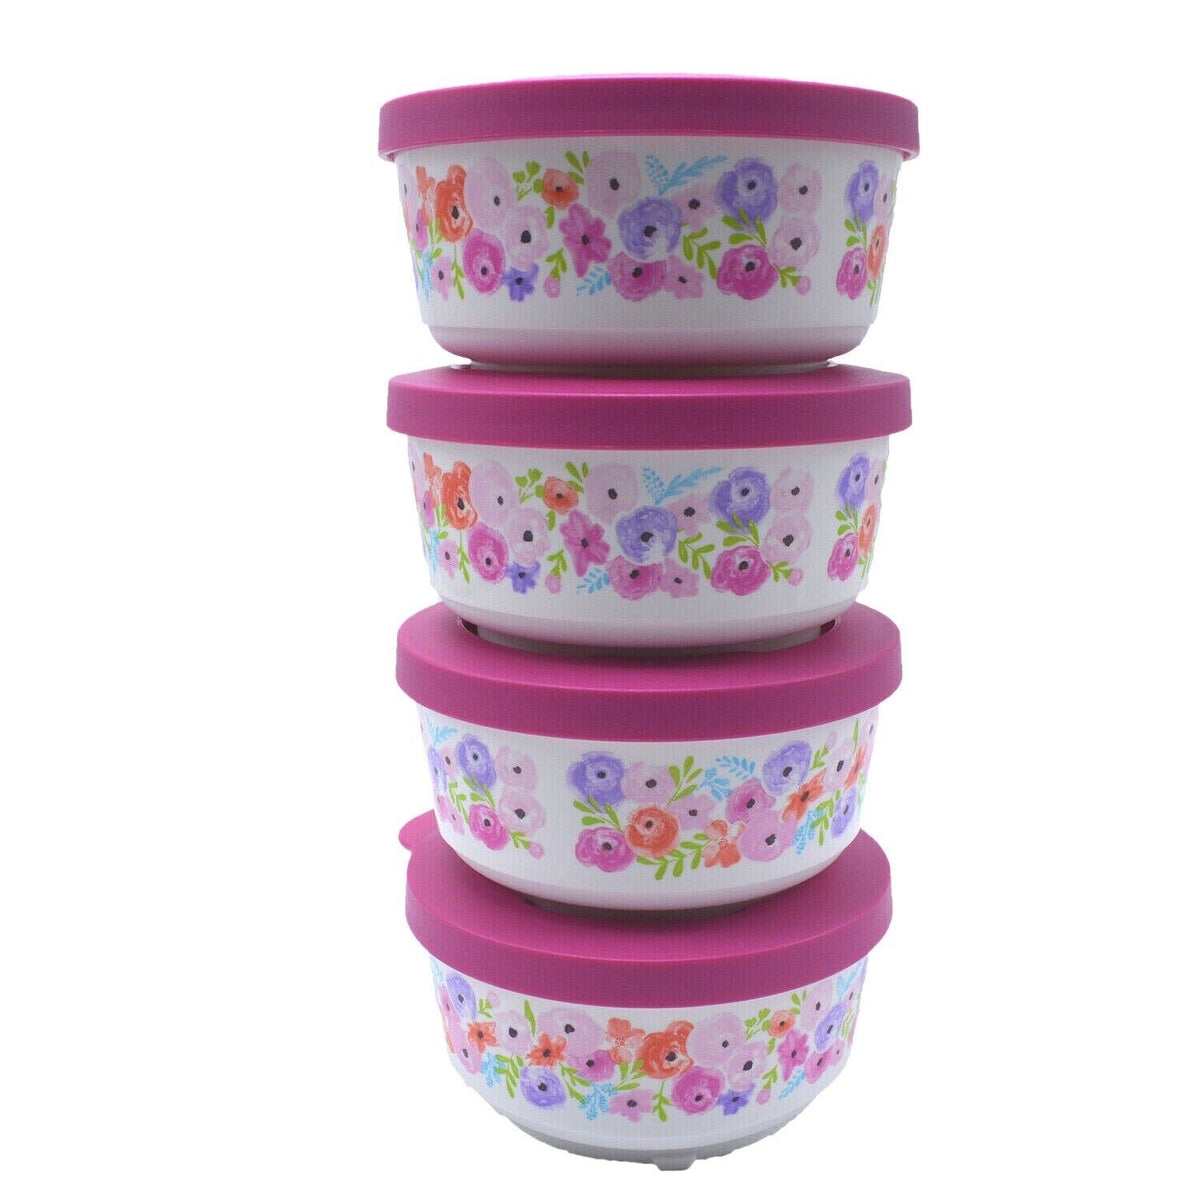 TUPPERWARE CONTAINERS ROUND with Lids Hot Pink, Neon Yellow MINT